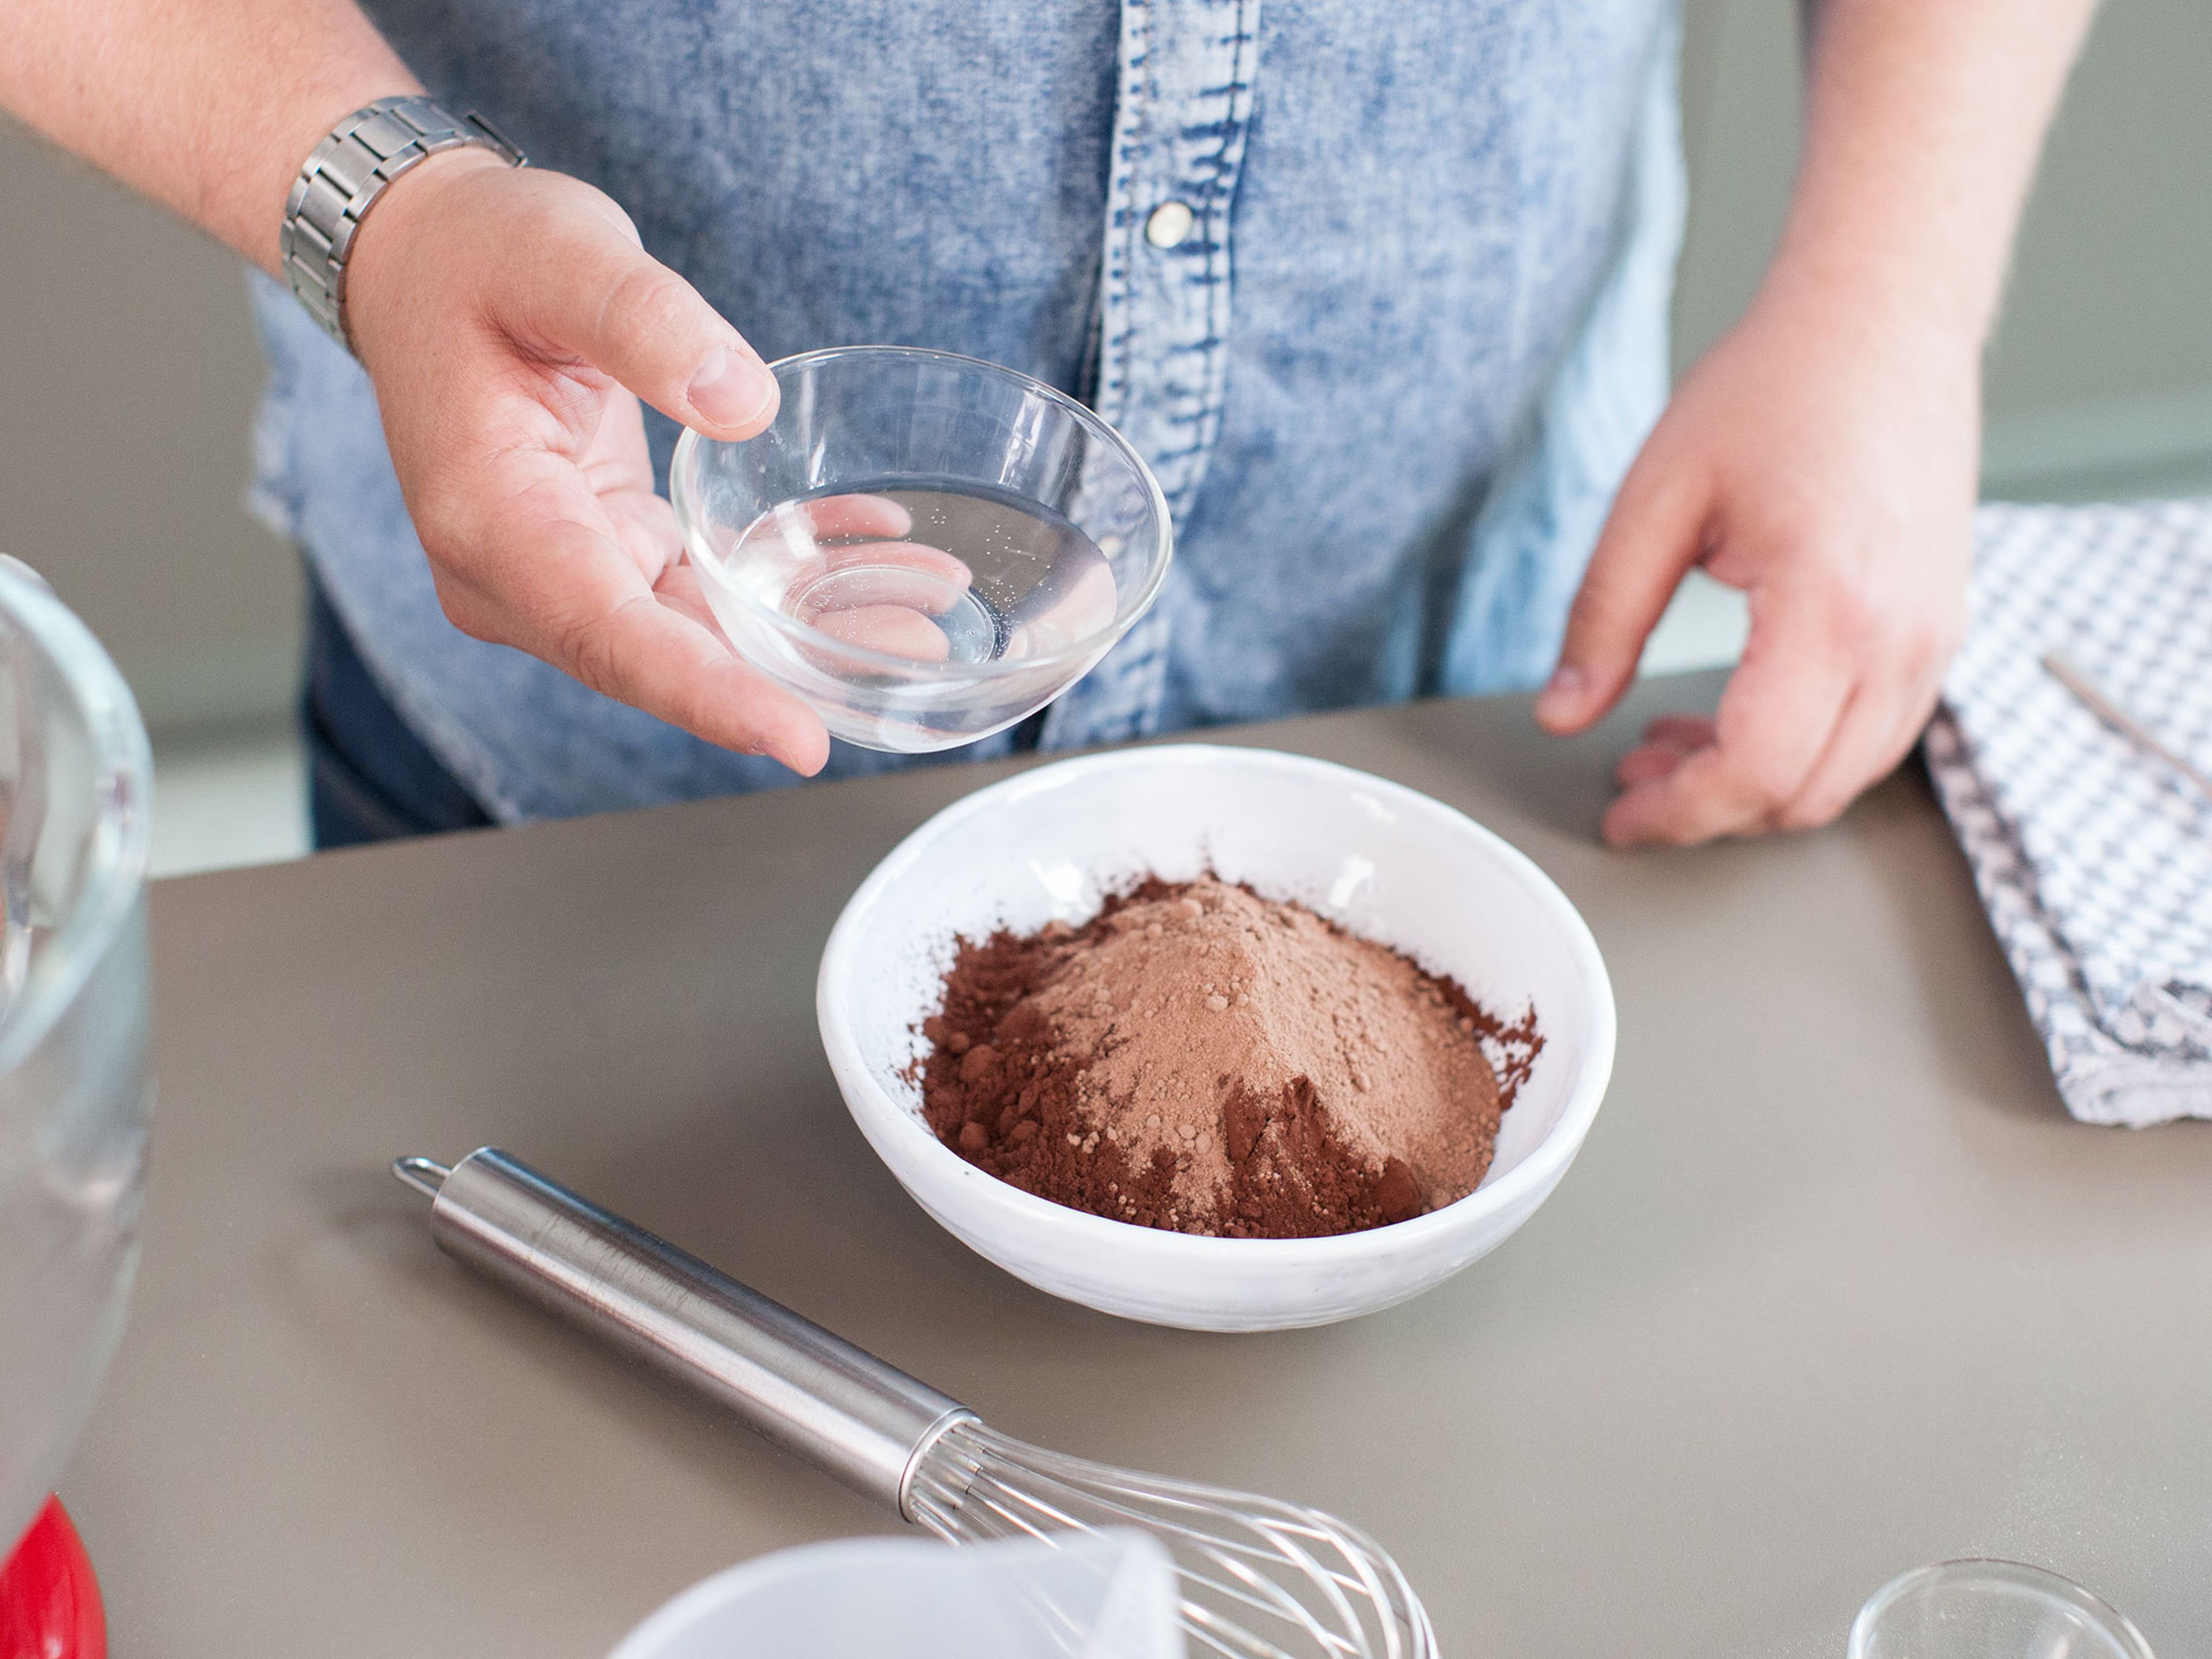 Preheat oven to 175°C/350°F. In a small bowl, mix flour, baking powder and salt. In a large bowl, mix part of the sugar with cocoa powder, chocolate malt powder if desired, and water until smooth.